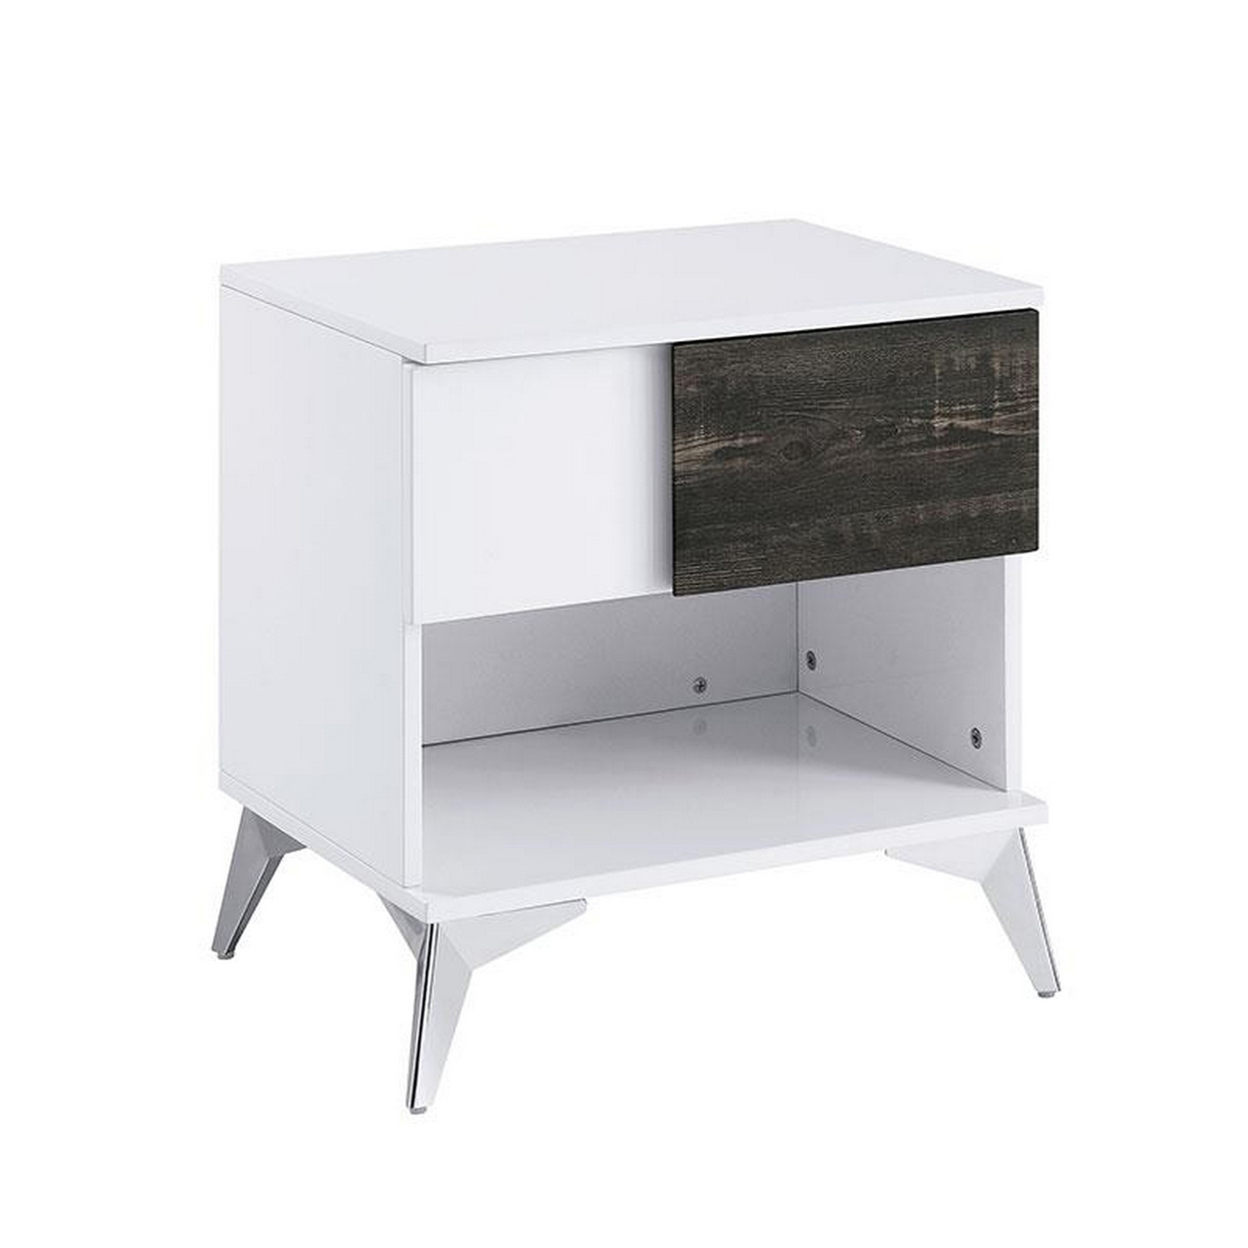 Two Tone End Table With Open Shelf, White And Brown- Saltoro Sherpi